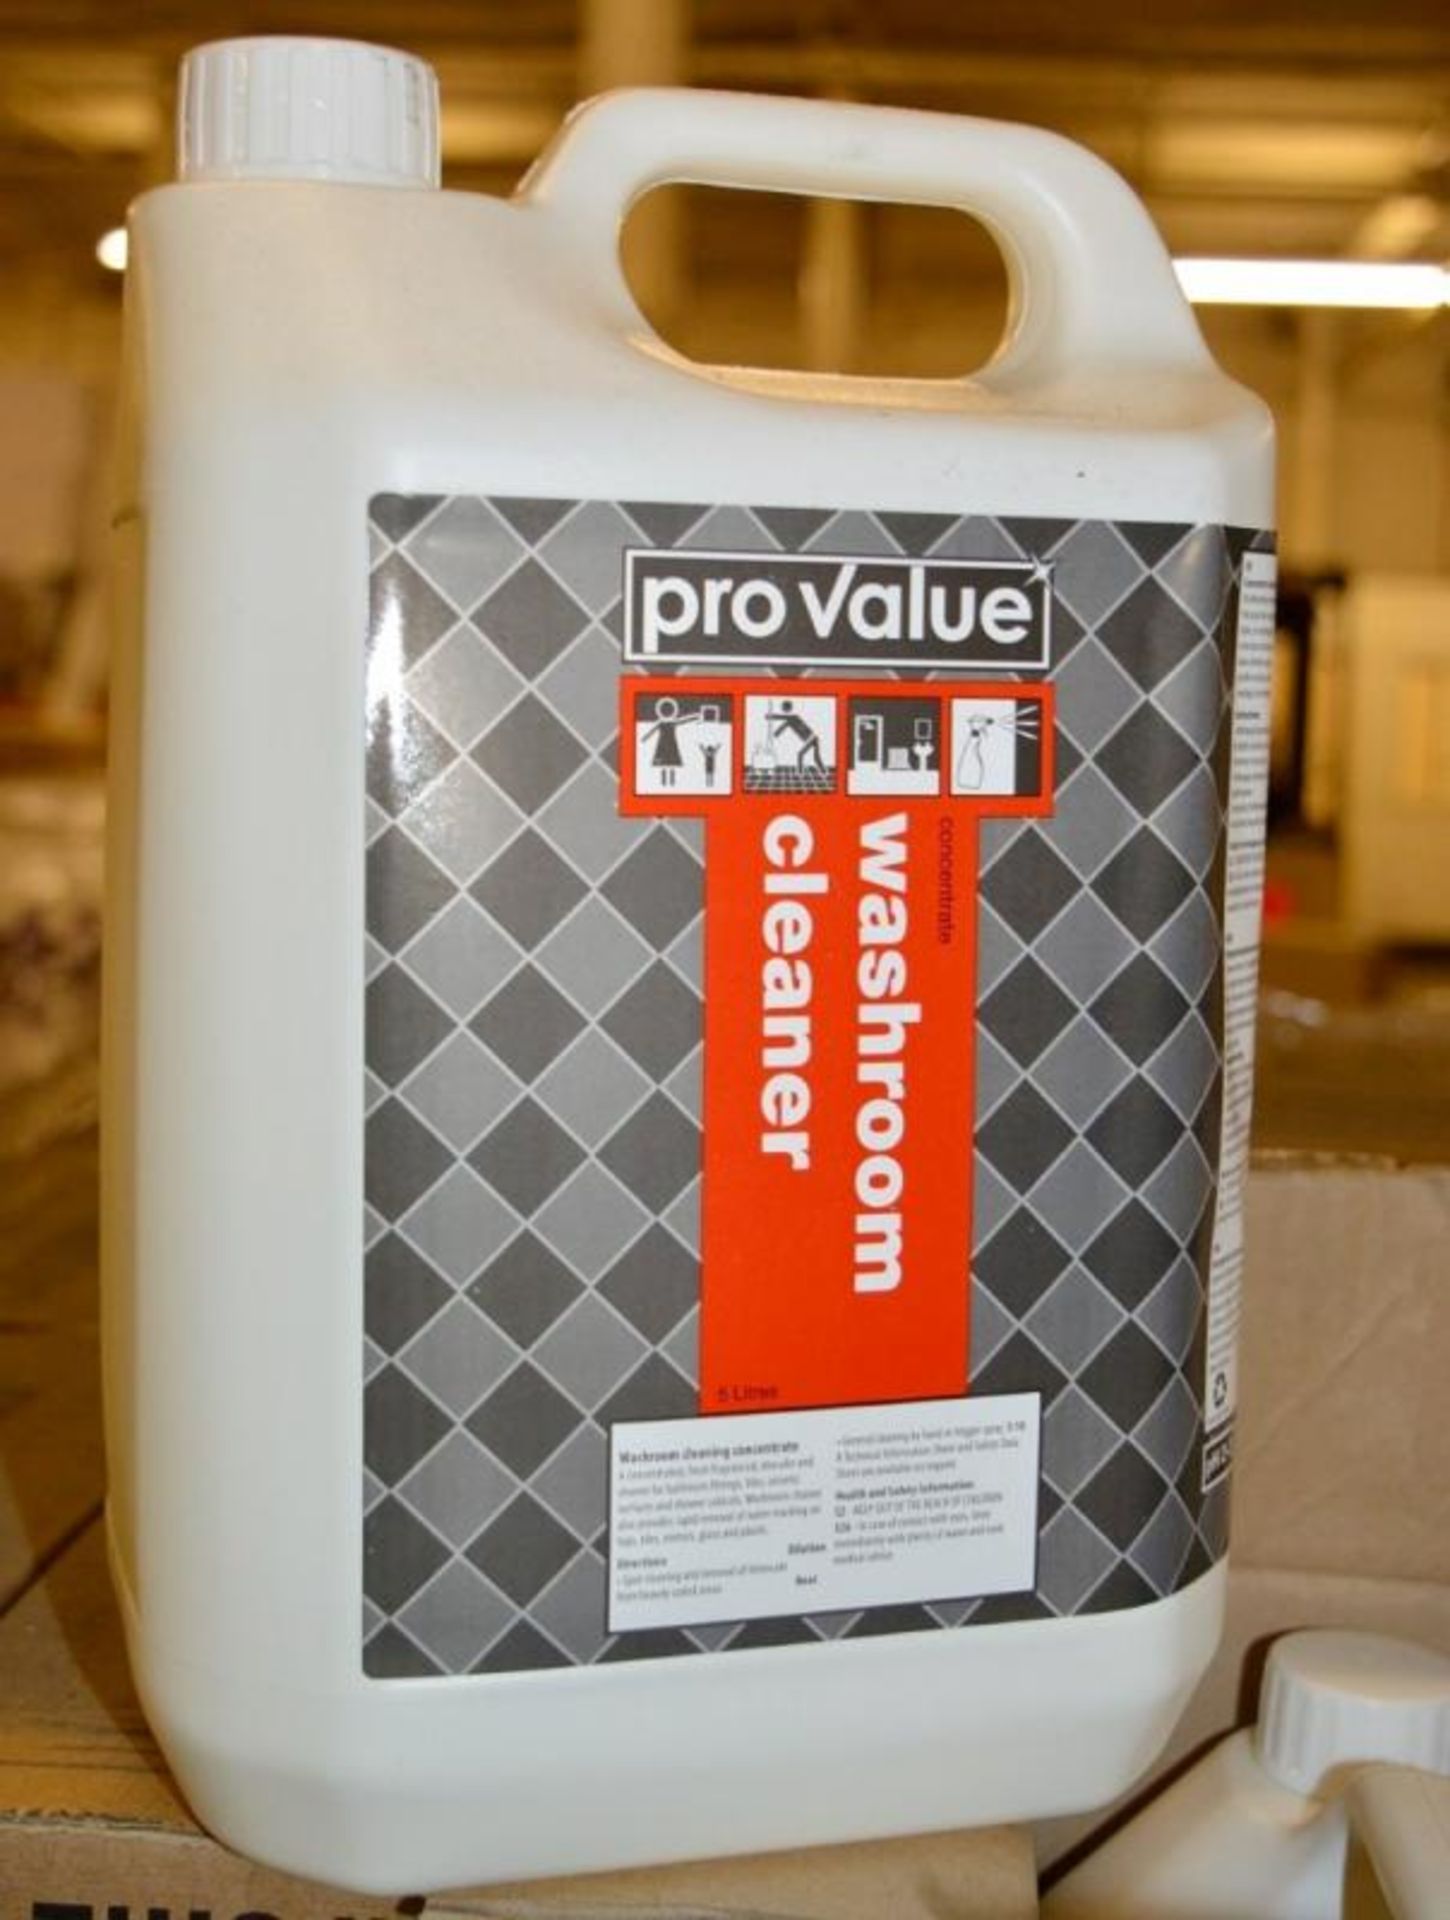 6 x Pro Value Concentrated Washroom Cleaner - Fresh Fragranced Descaler And Cleaner With Rapid Water